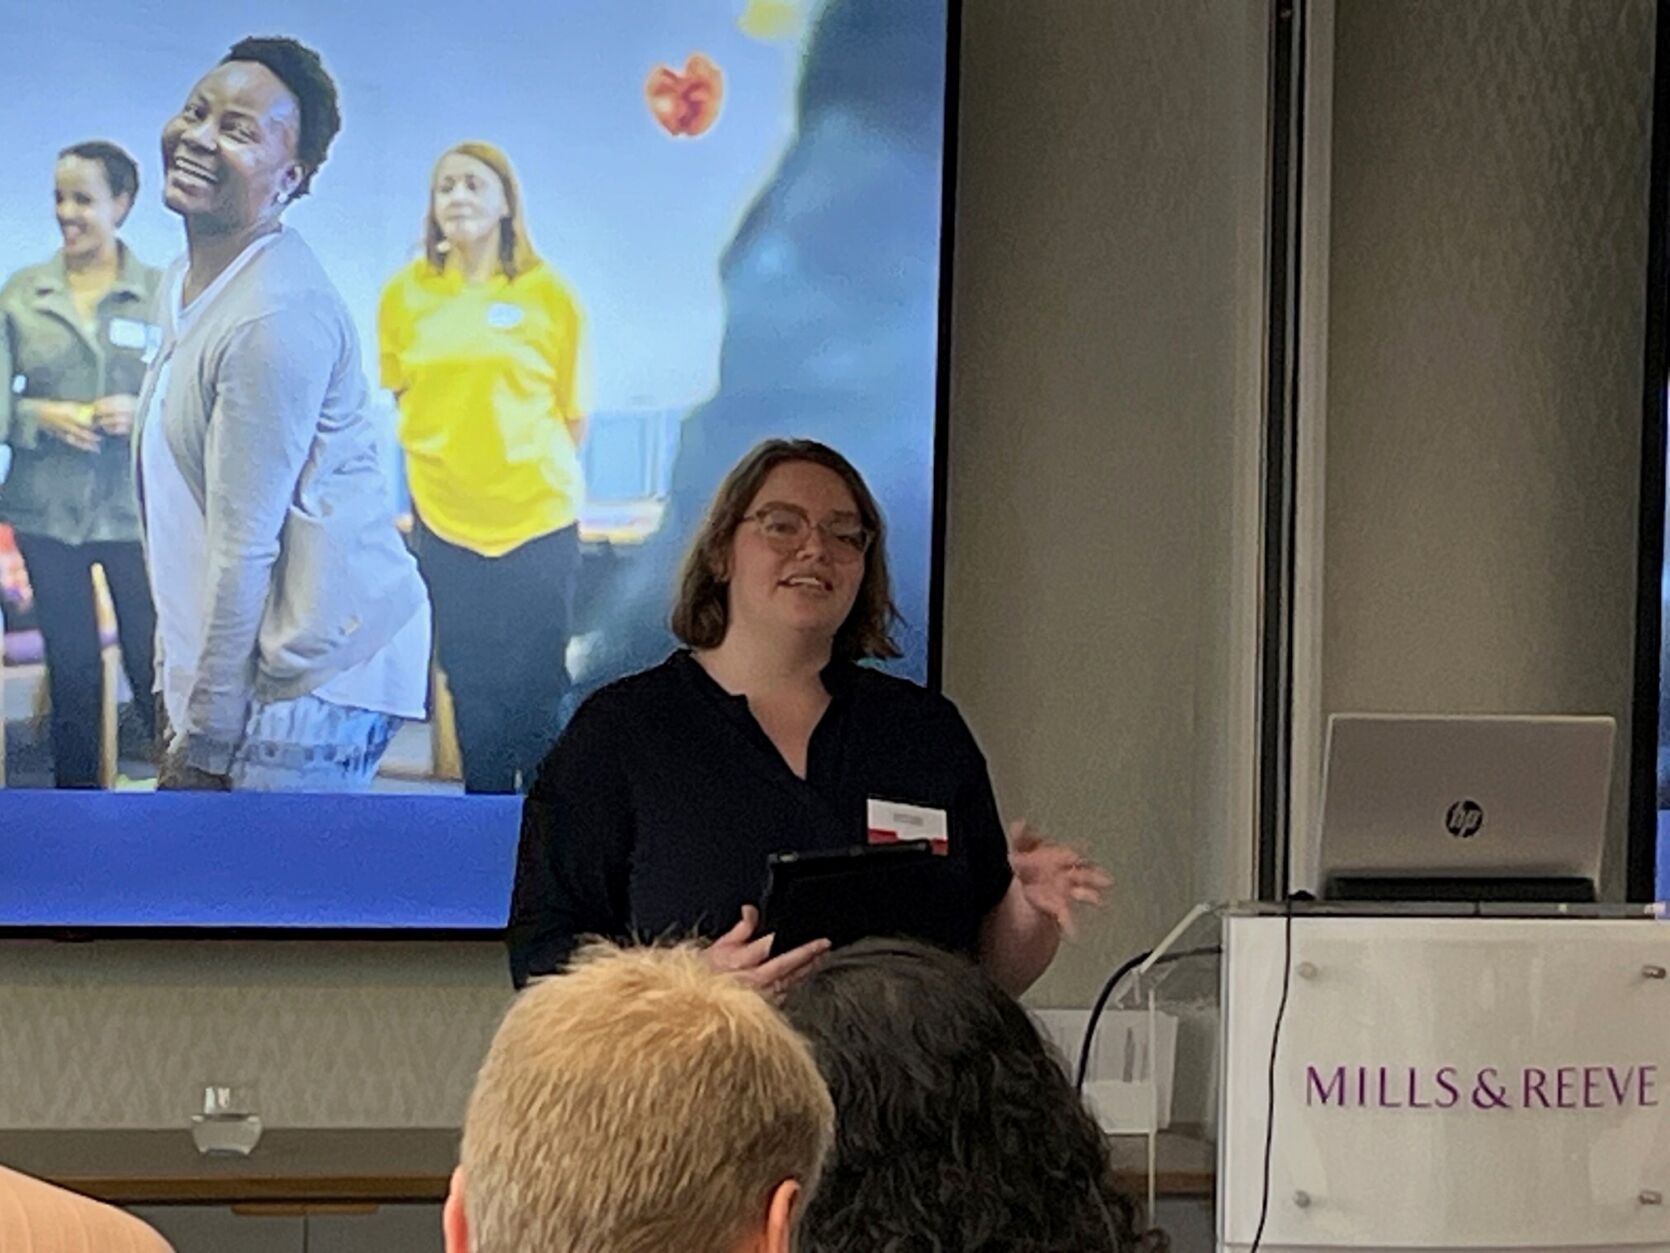 A person presenting at the Women's Fund for London event. In foreground is a podium with the words 'Mills and Reeve' on it and on the slides in the background is a group of young people.